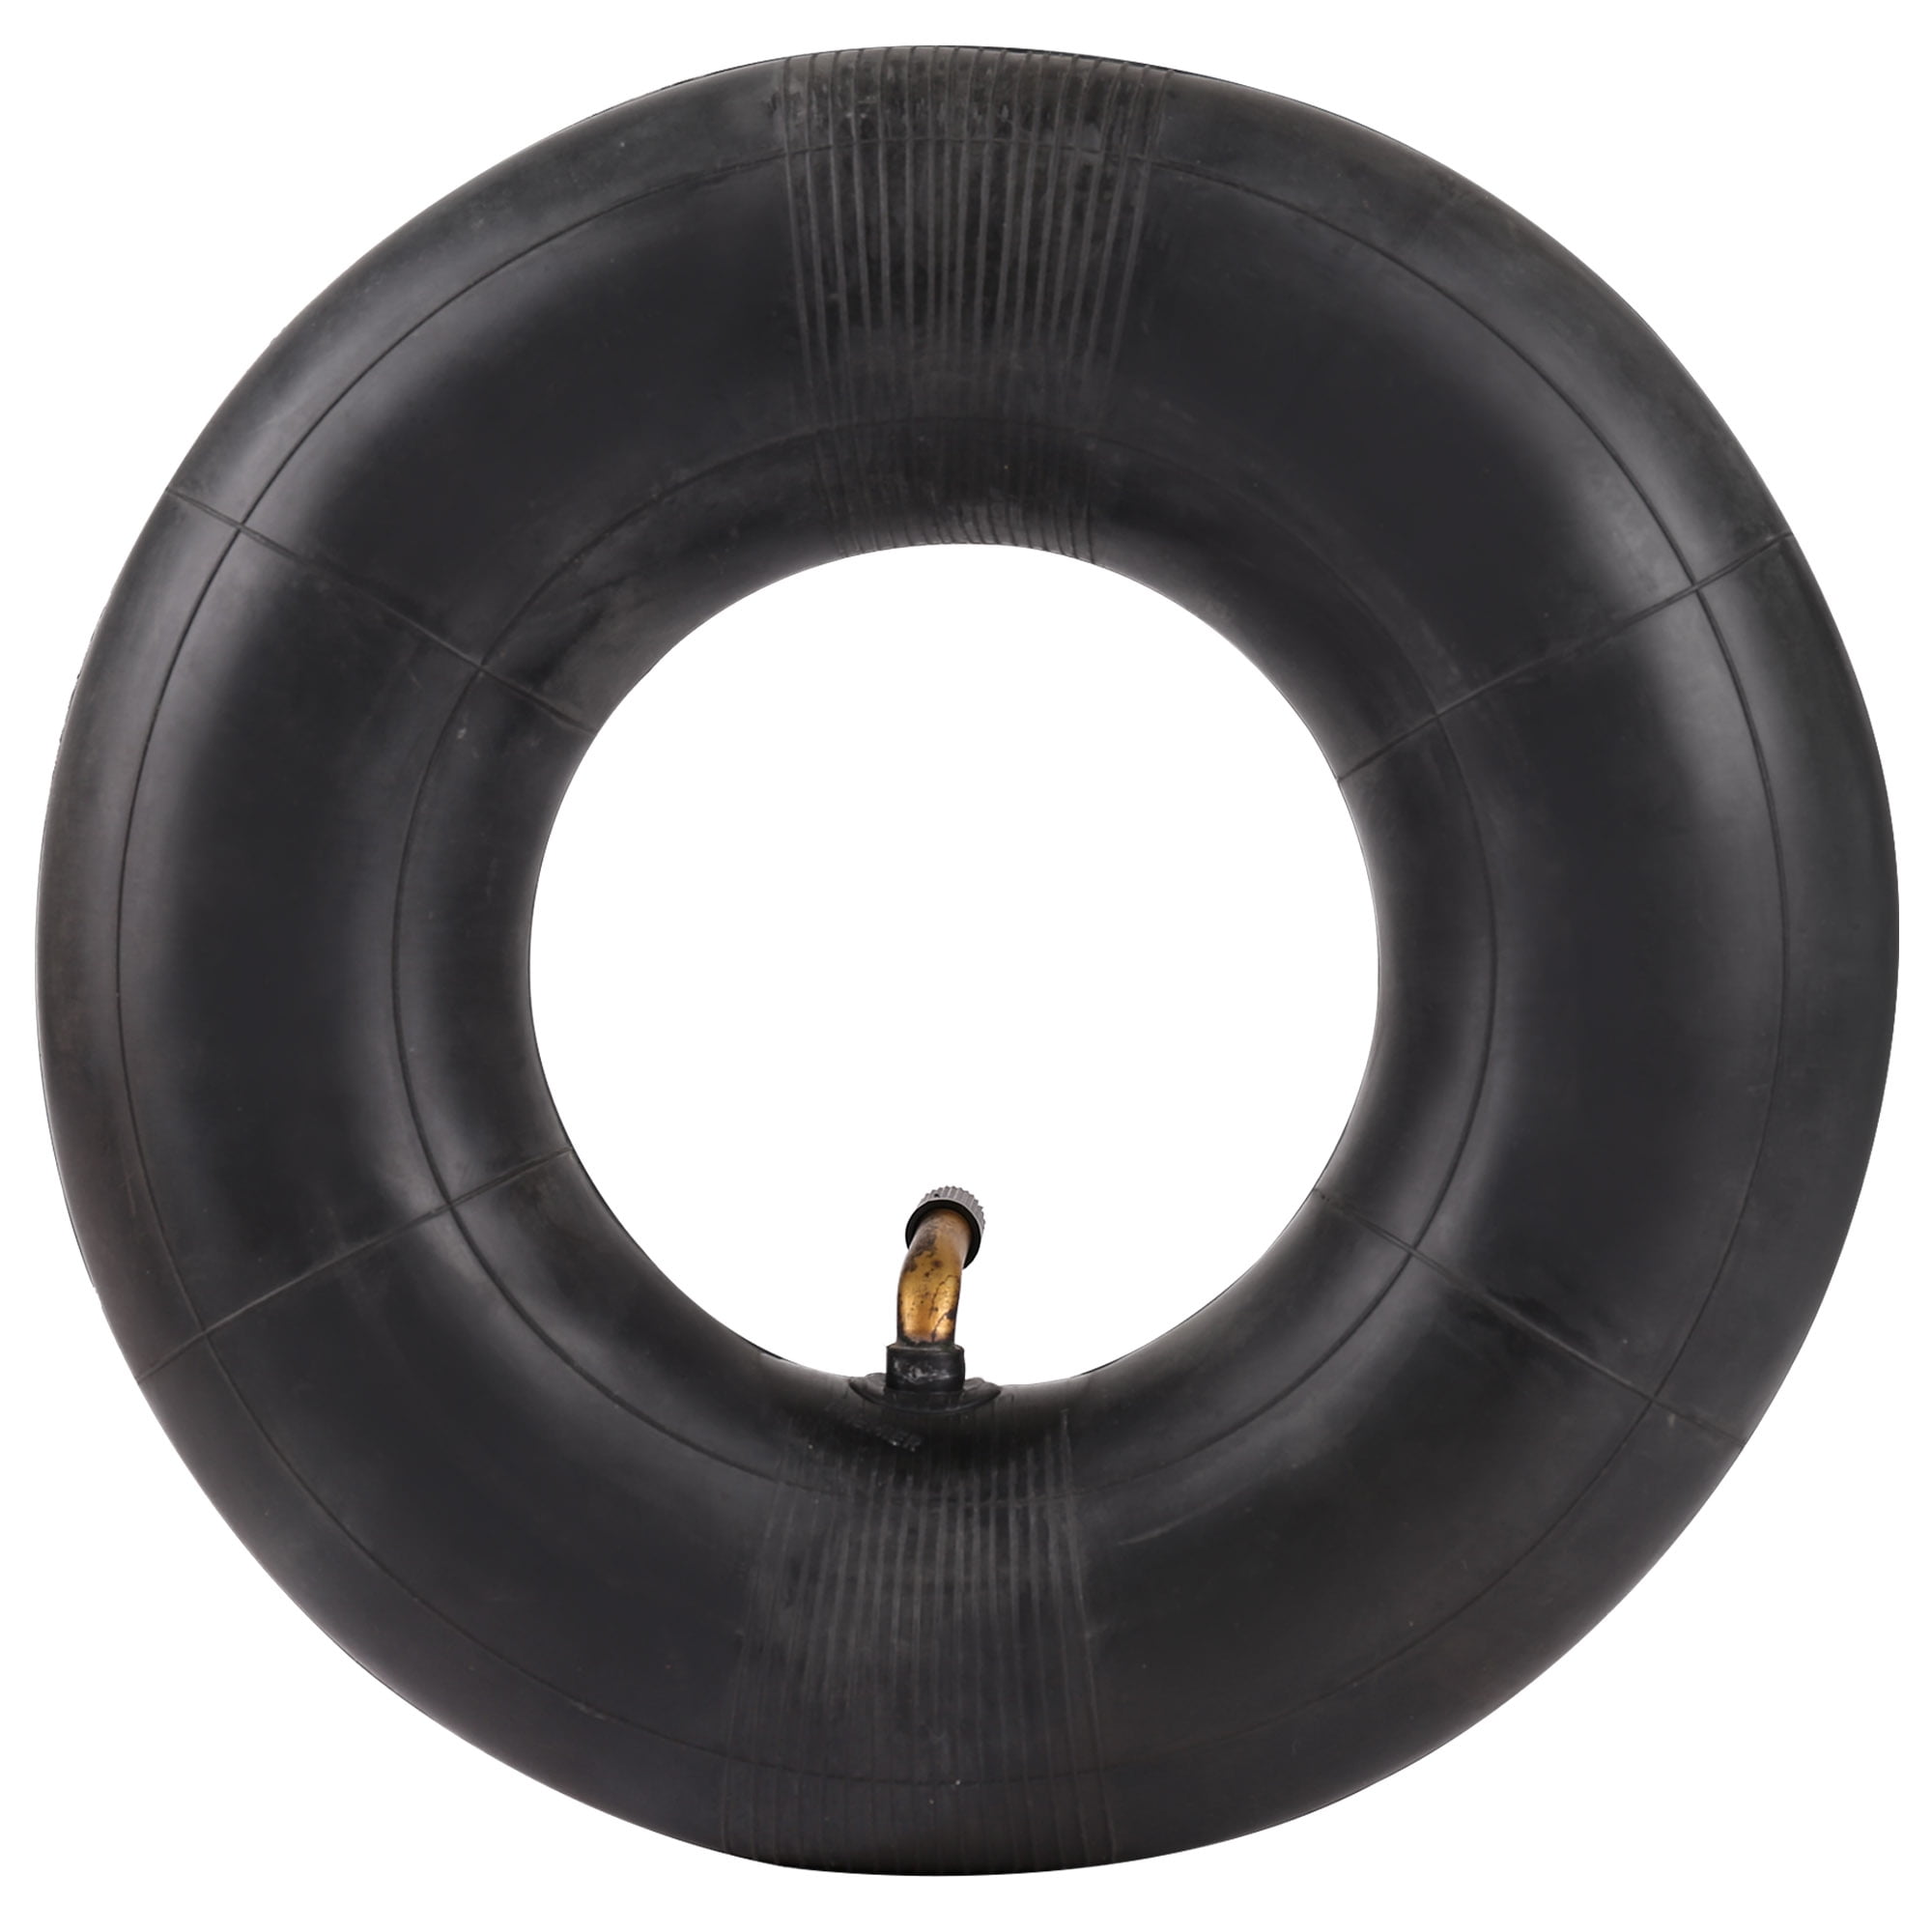 4.10/3.50-4 Inner Tube Tire 4.1/3.5-4 Heavy Duty Replacement Inner Tube For Hand Trucks 2-Pack Tractors Trailers and More 4.10 3.50-4 Tire Tube Wheelbarrows Lawn Mowers Dollies 